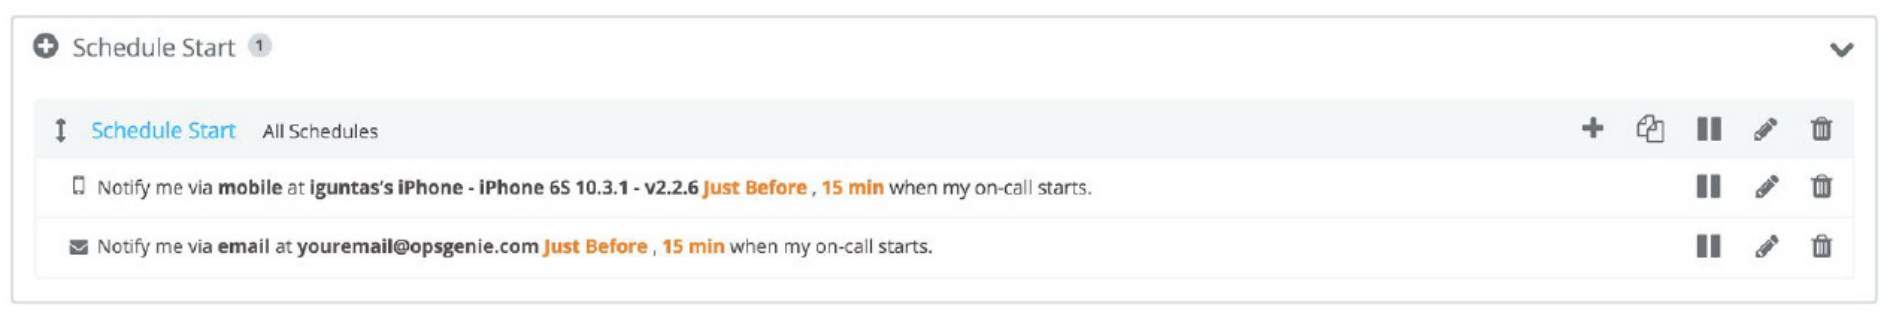 7 Tips To Get Your ITSM Teams Ready for On-call - rules for notifications in Opsgenie